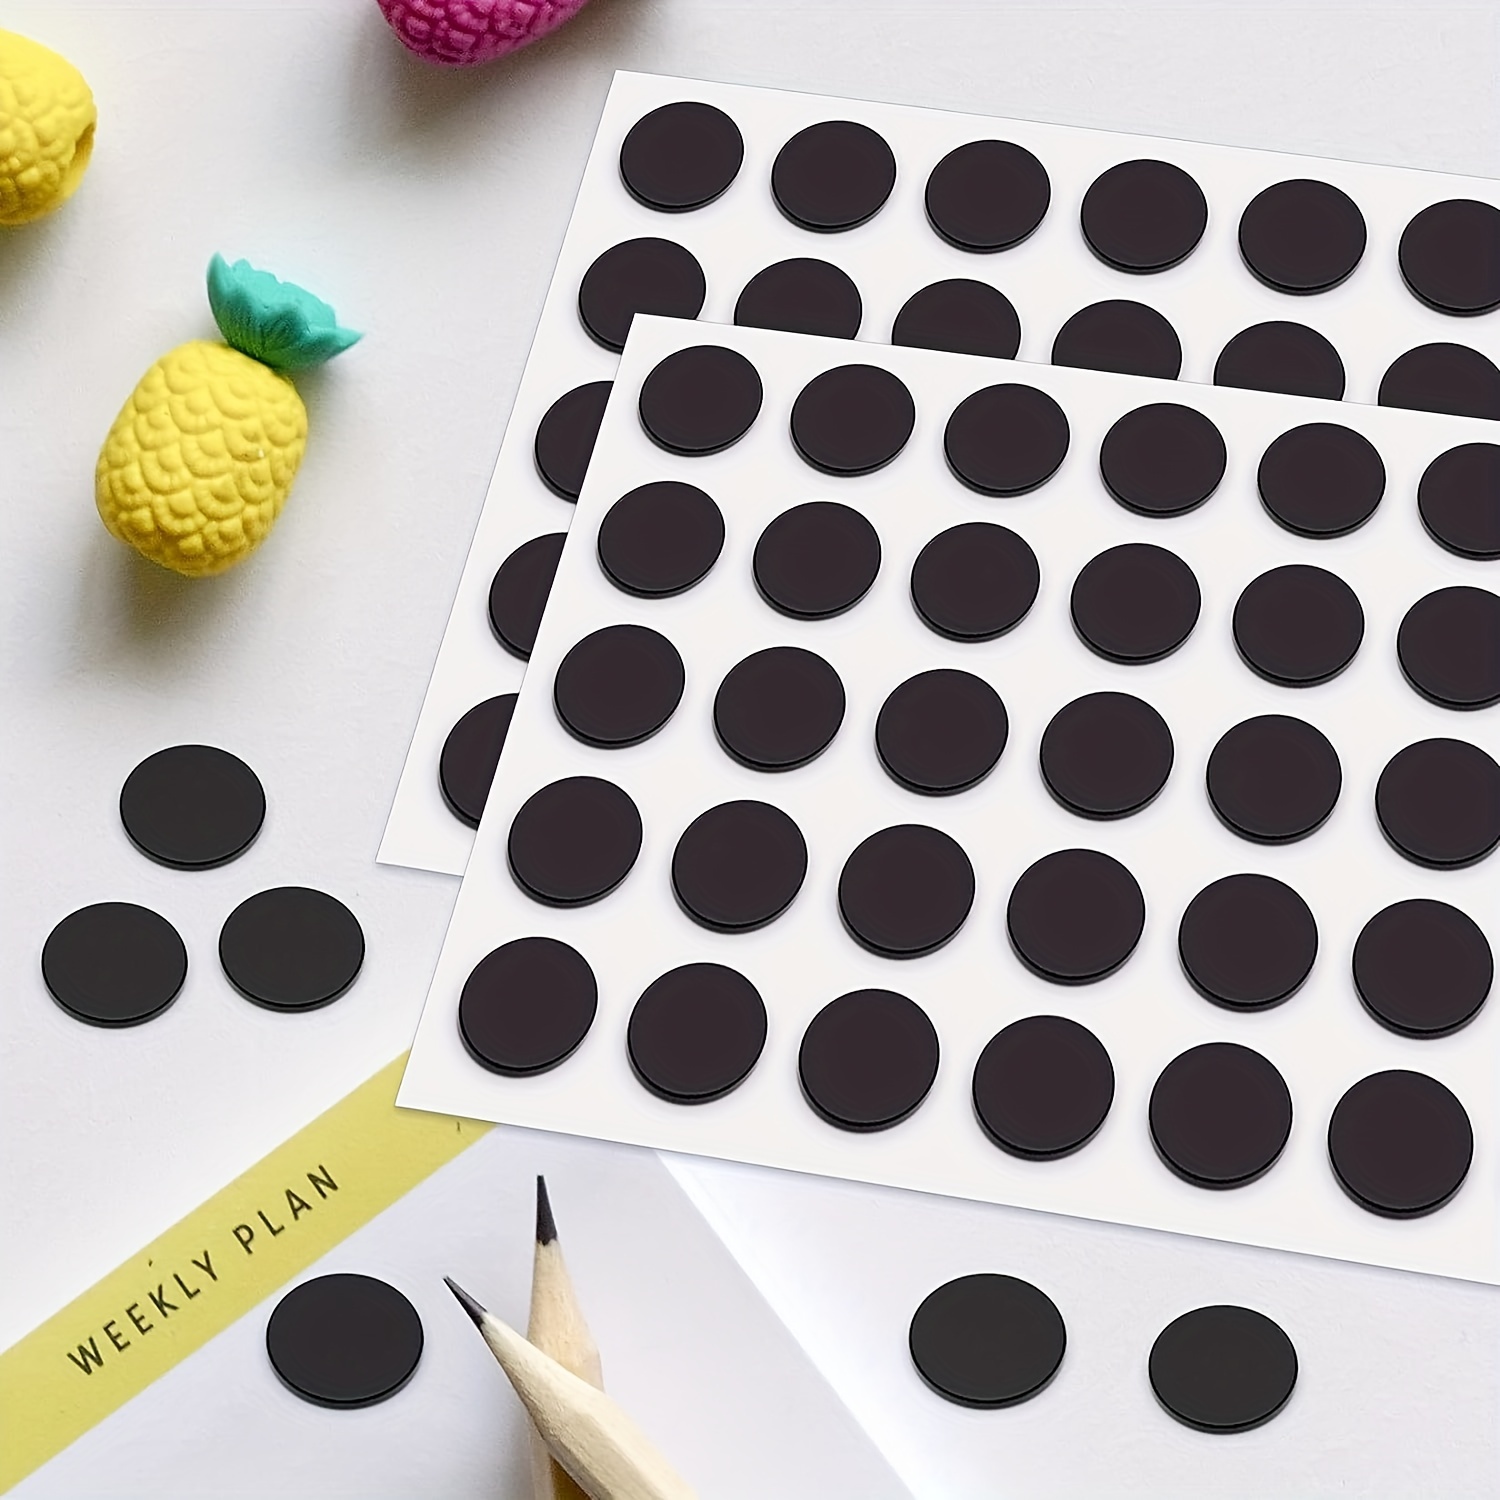  Magnetic Dots - Self Adhesive Magnet Dots (0.8 x 0.8) - Peel  & Stick Magnetic Circles - Flexible Sticky Magnets - Sheets is Alternative  to Magnetic Squares, Stickers, Strip and Tape : Office Products